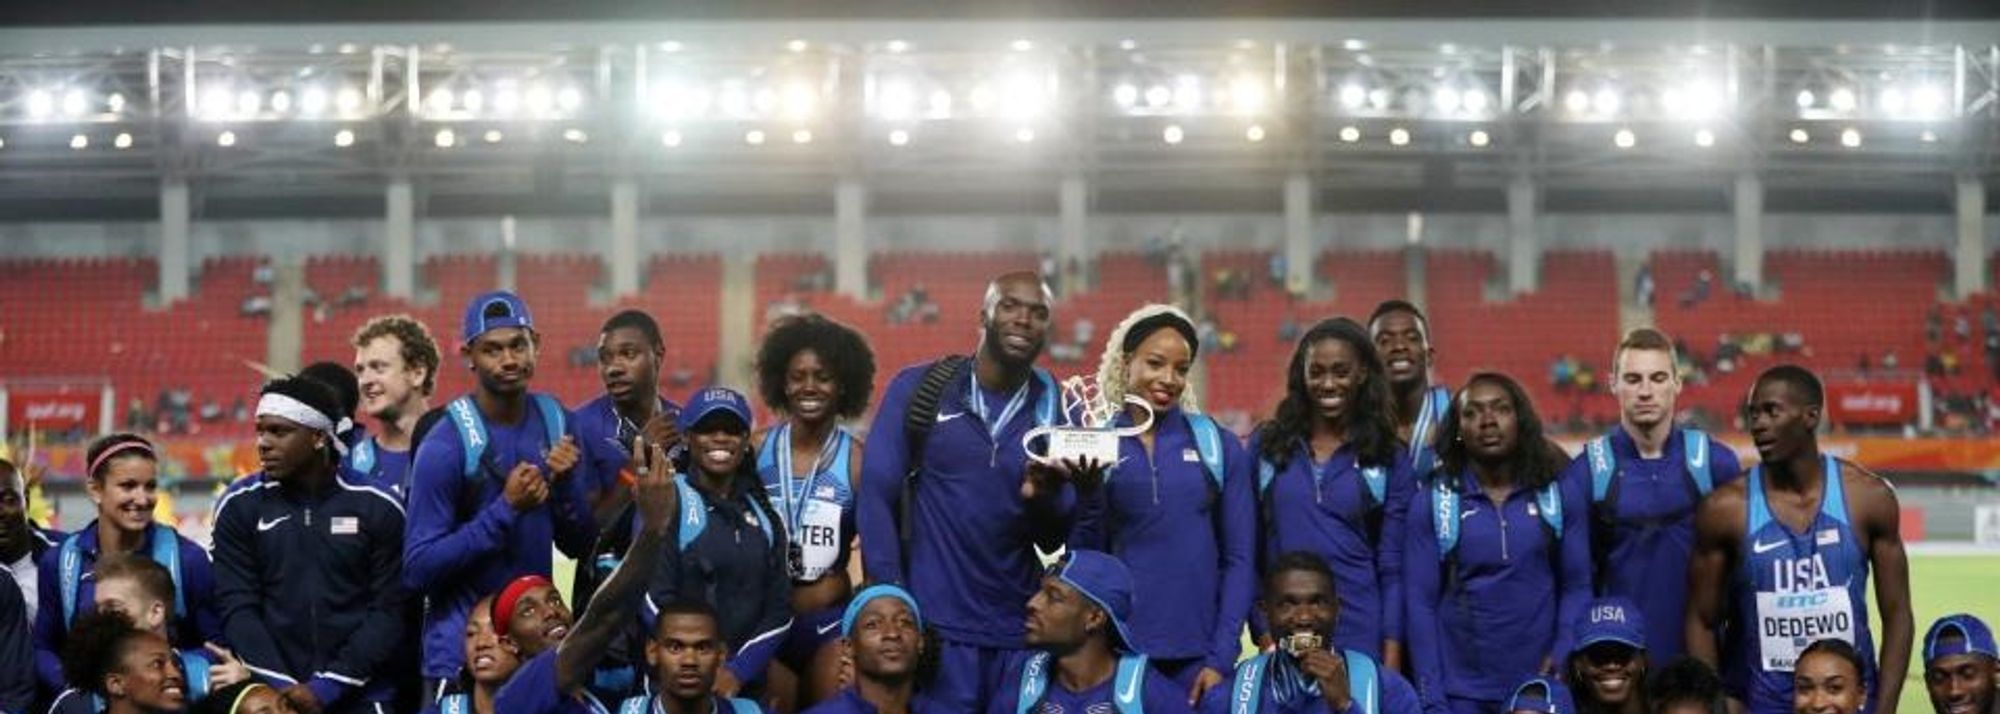 Solidifying their position as the strongest relay nation in the world, the USA collected their third successive Golden Baton honour at the IAAF/BTC World Relays Bahamas 2017.